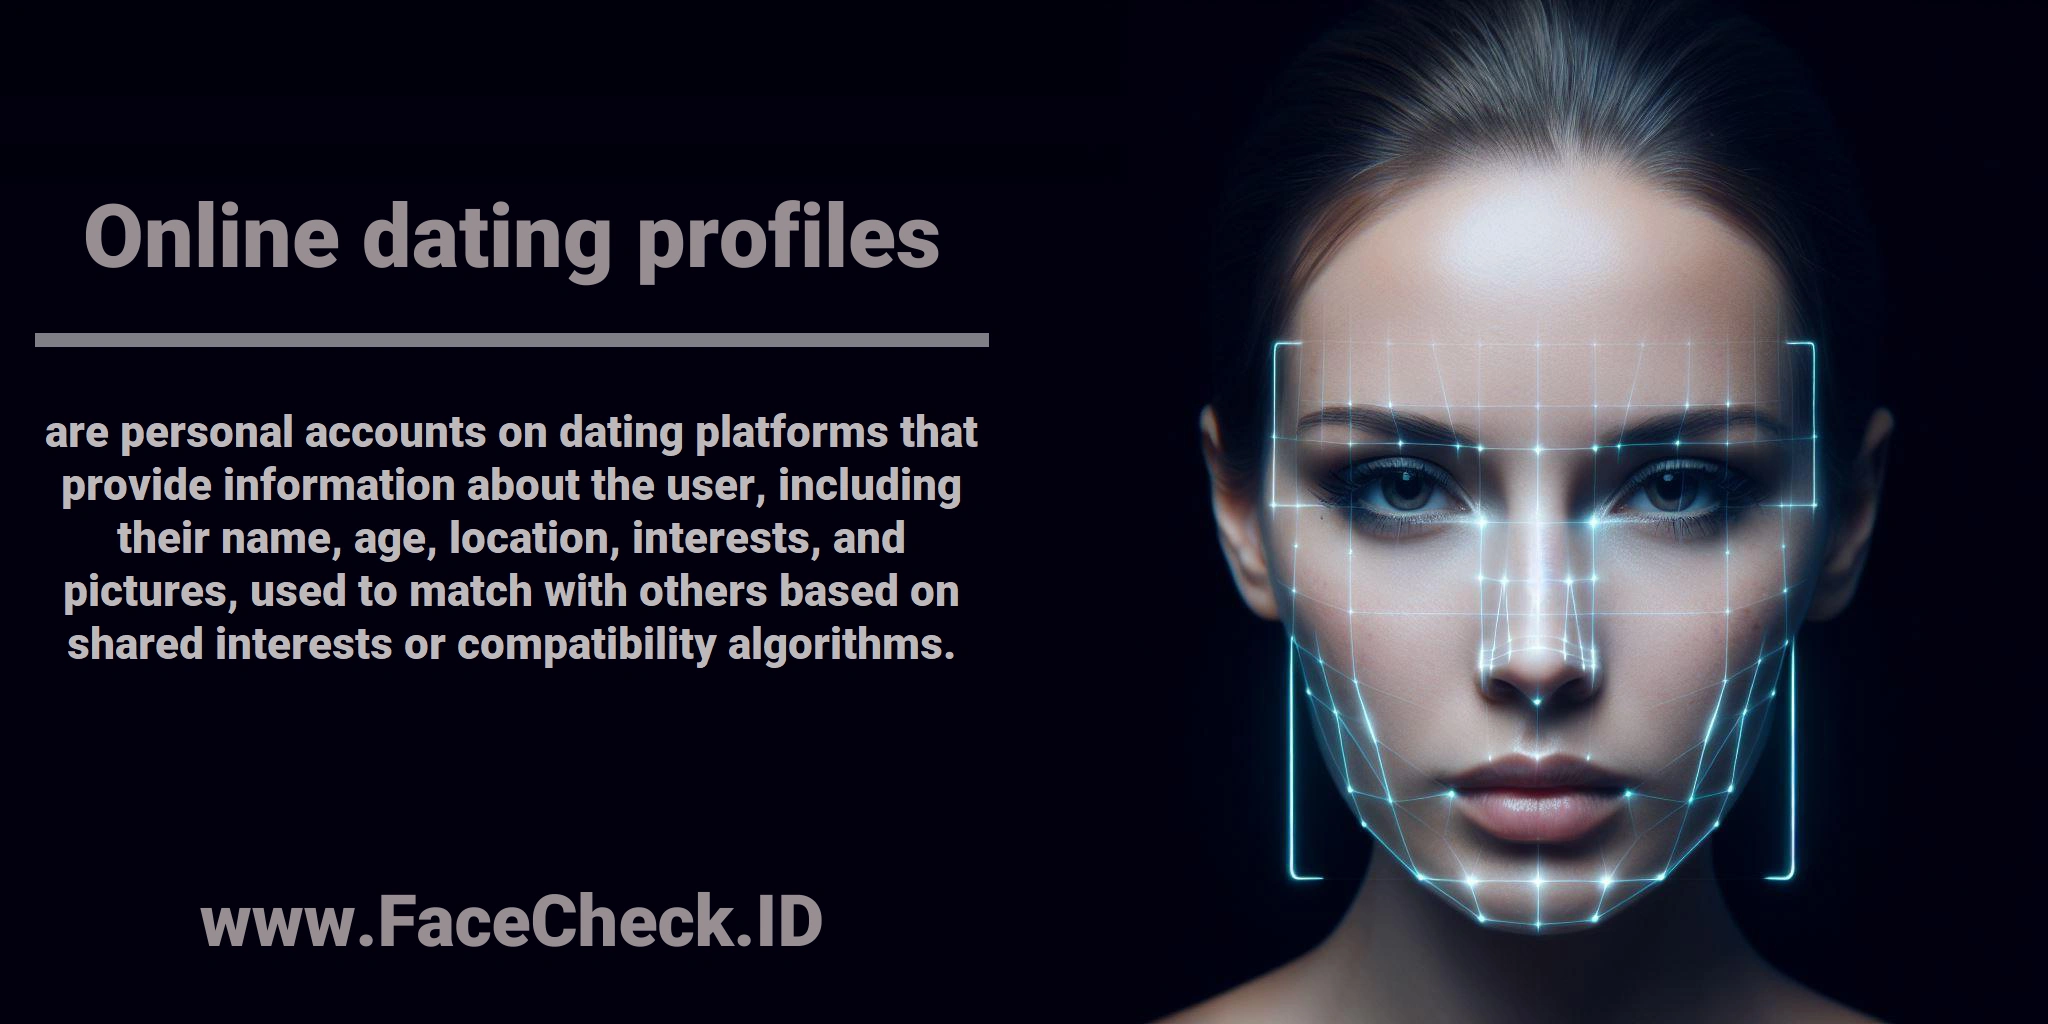 <b>Online dating profiles</b> are personal accounts on dating platforms that provide information about the user, including their name, age, location, interests, and pictures, used to match with others based on shared interests or compatibility algorithms.